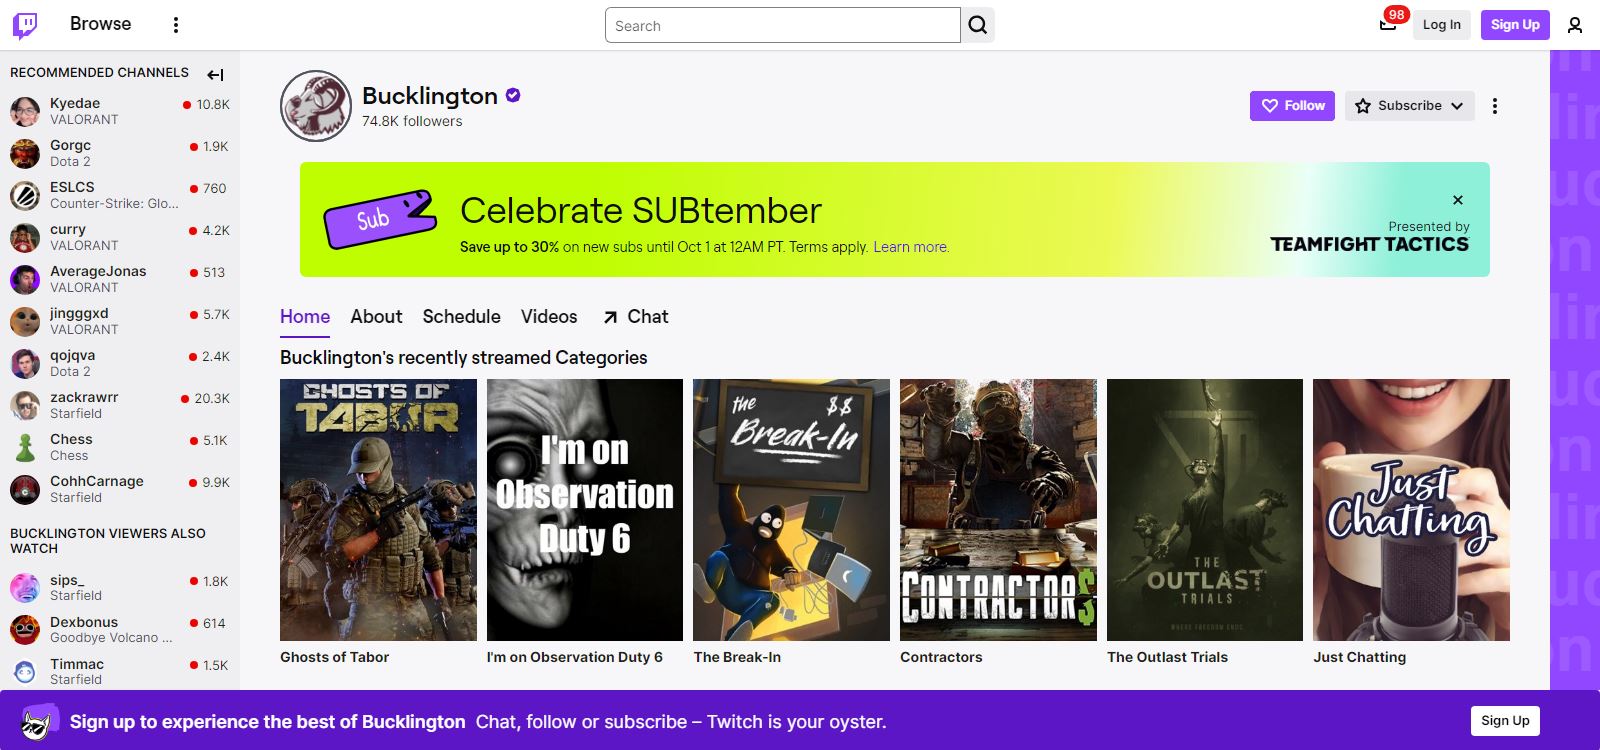 Bucklington's twitch page where some of his recent streams and games are on display